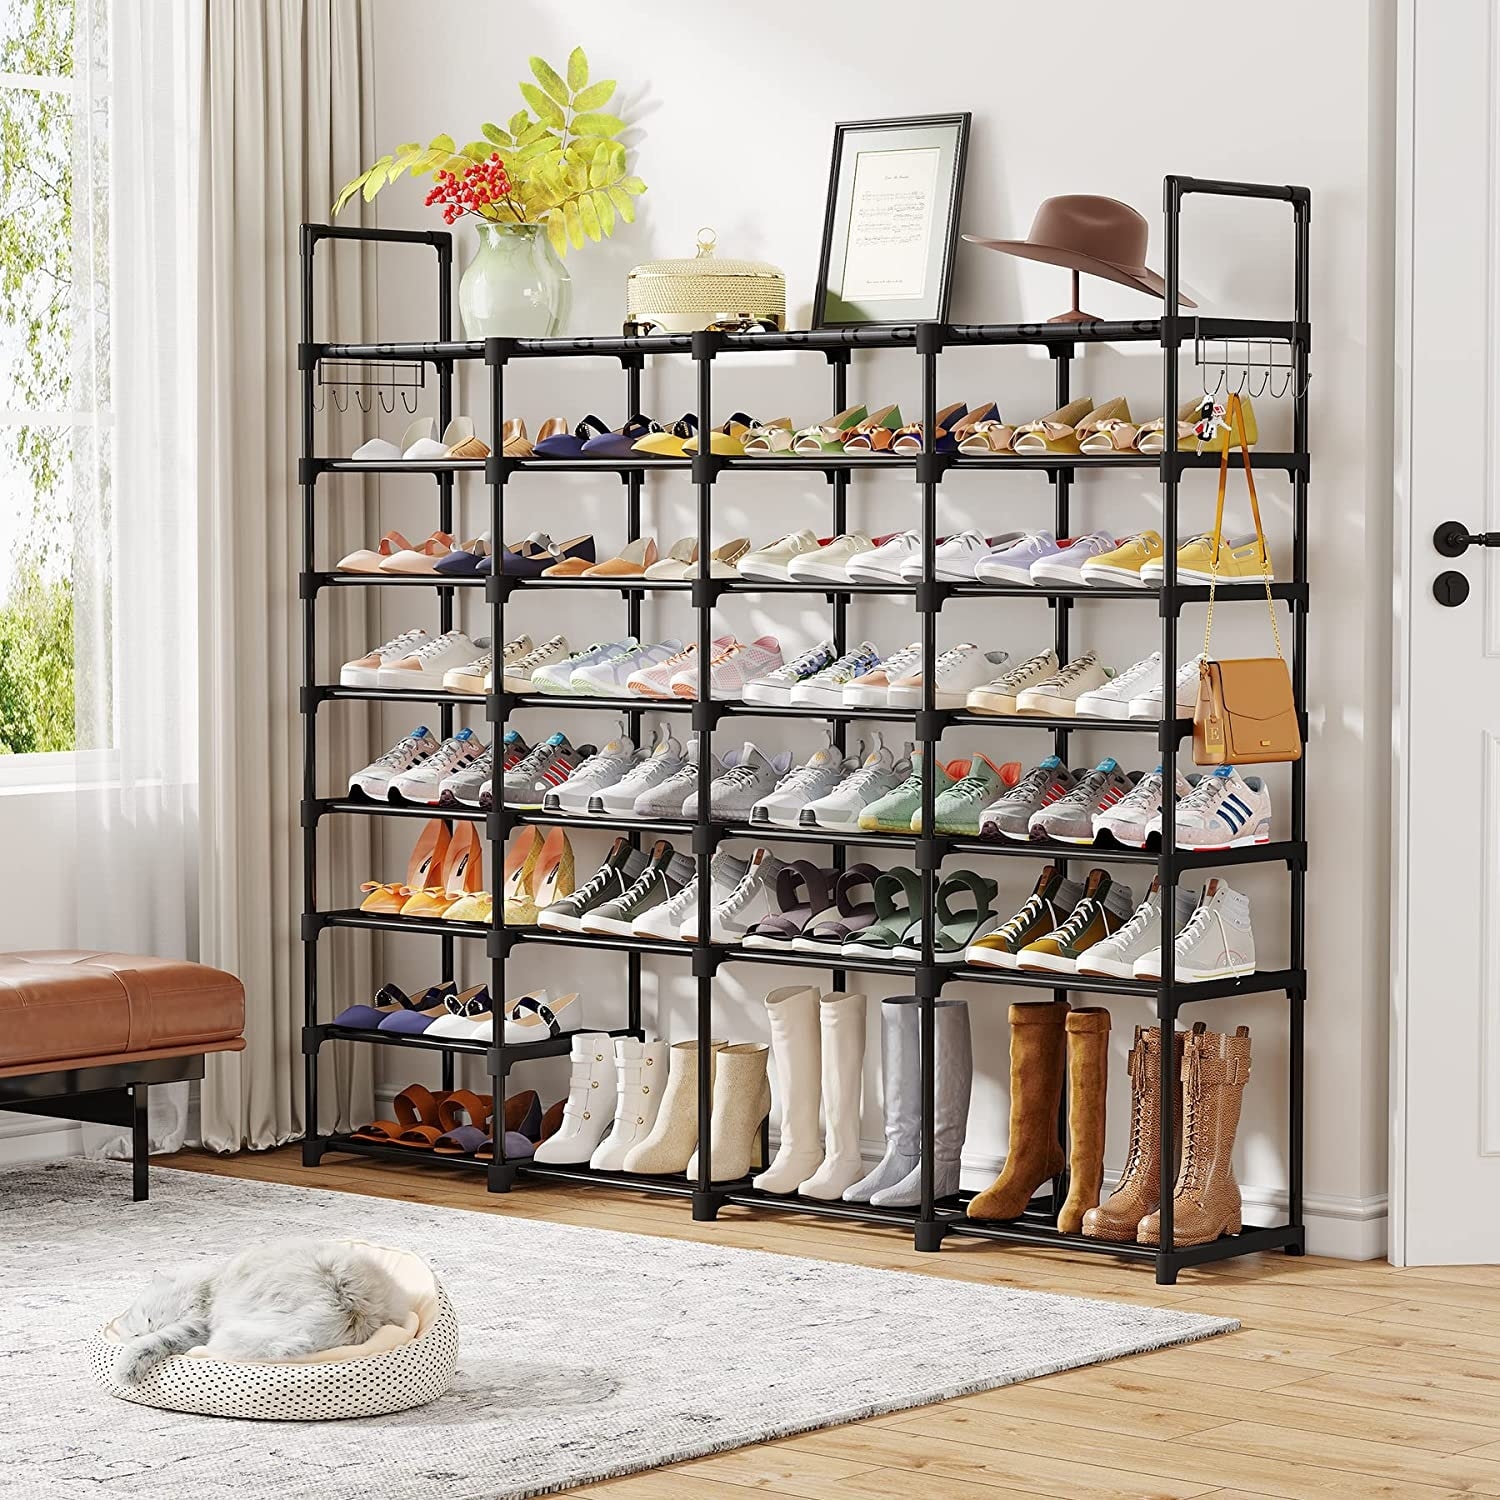 https://ak1.ostkcdn.com/images/products/is/images/direct/9fd6728ba85e56777a0adc506b366f7449477559/Large-Shoe-Rack-Organizer---Tiered-Storage-Shoe-Stand-Tower-for-Sneakers%2C-Heels%2C-Flats%2C-and-Accessories-by-Lee-Furniture.jpg